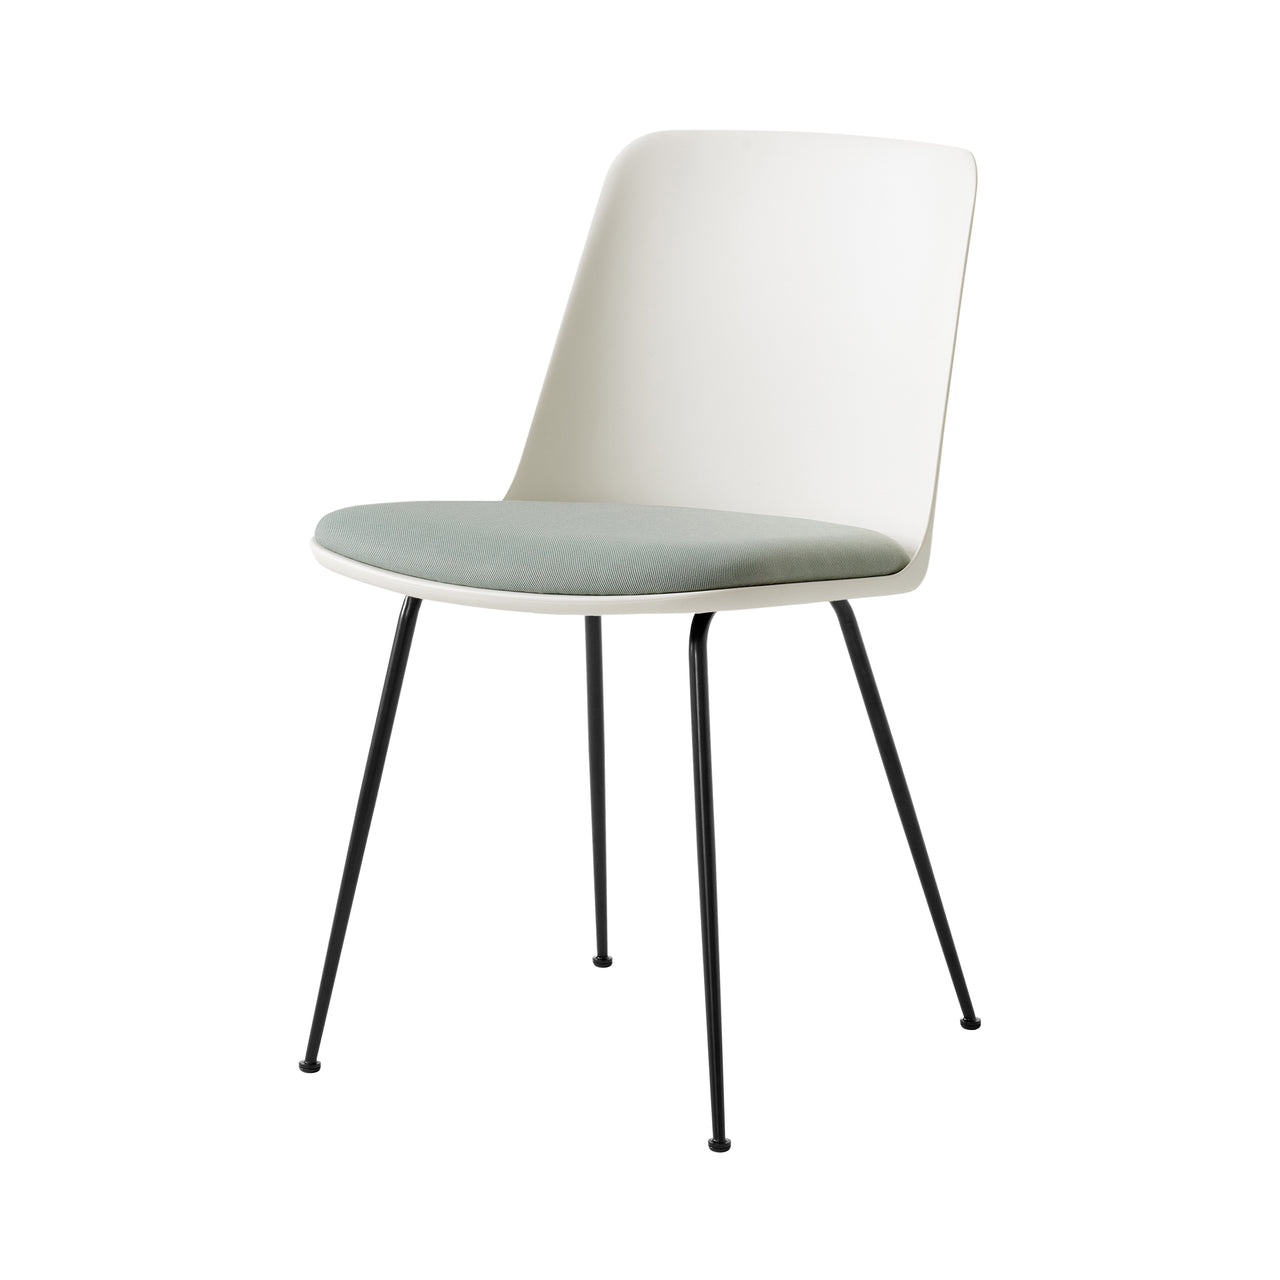 Rely Chair HW7: White + Black